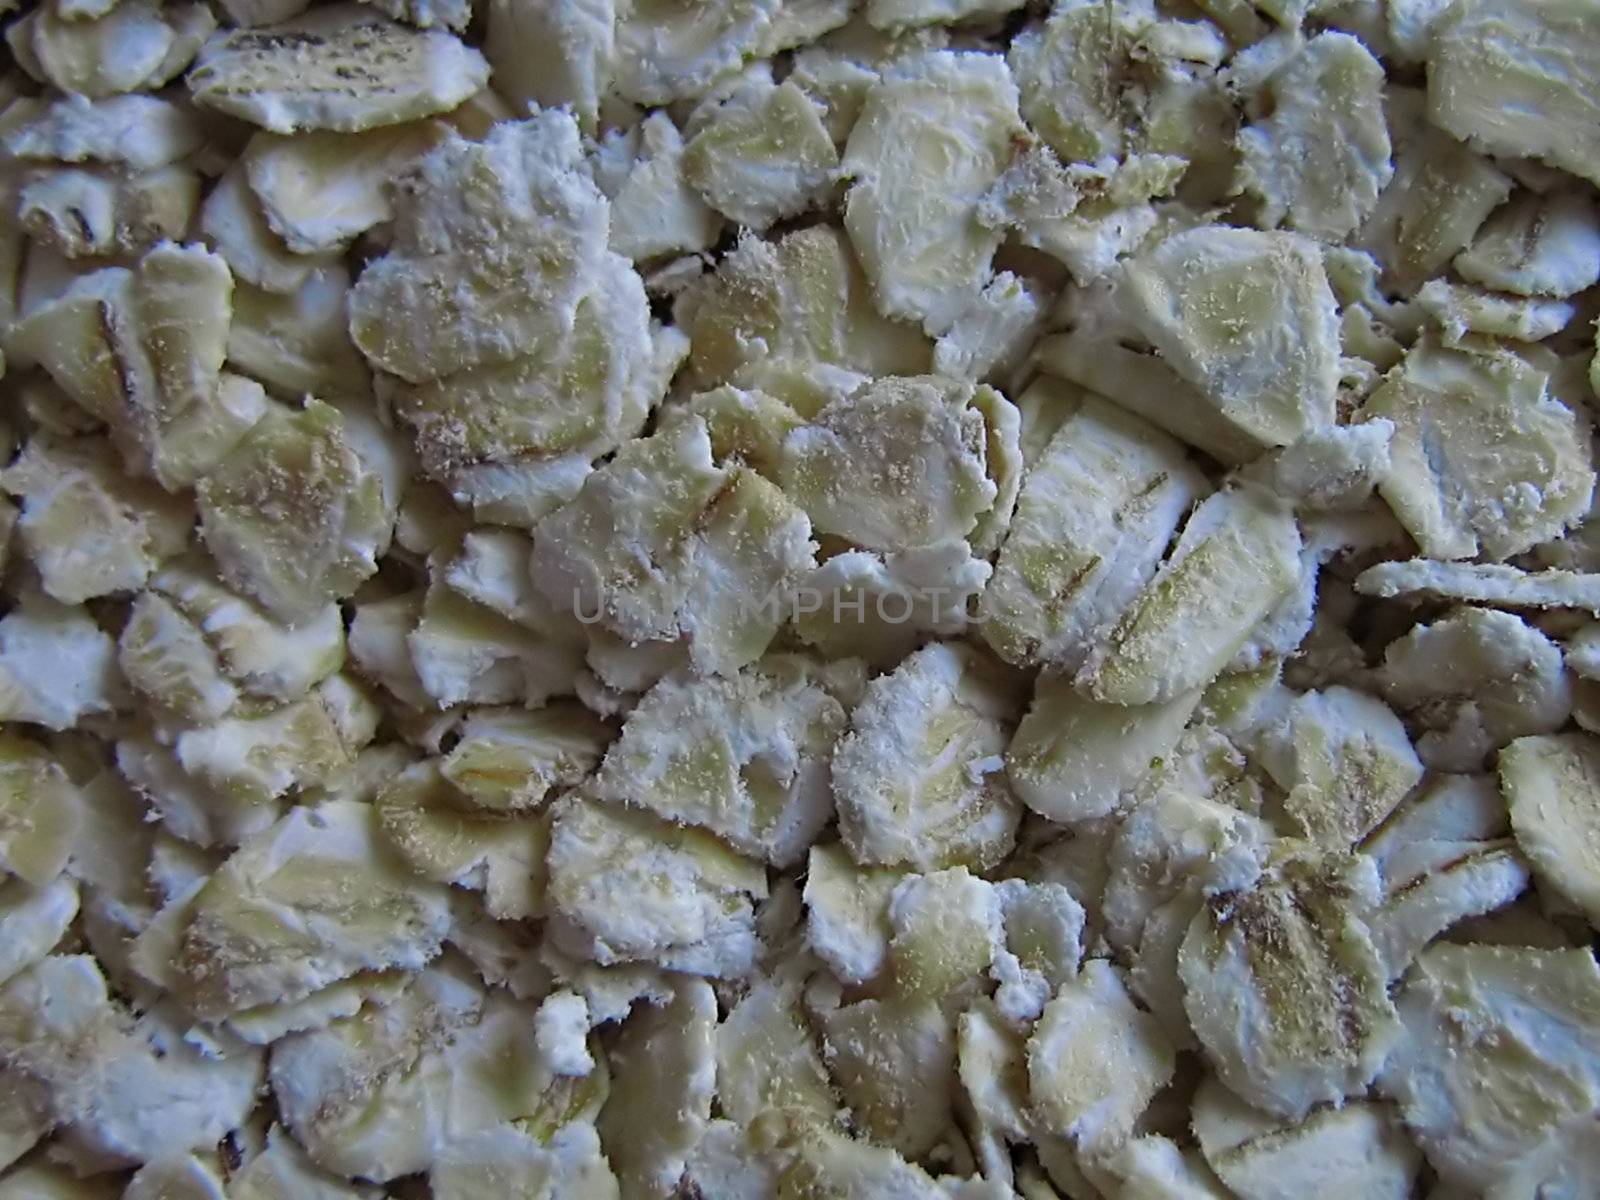 A photograph of uncooked oatmeal detailing its texture.
